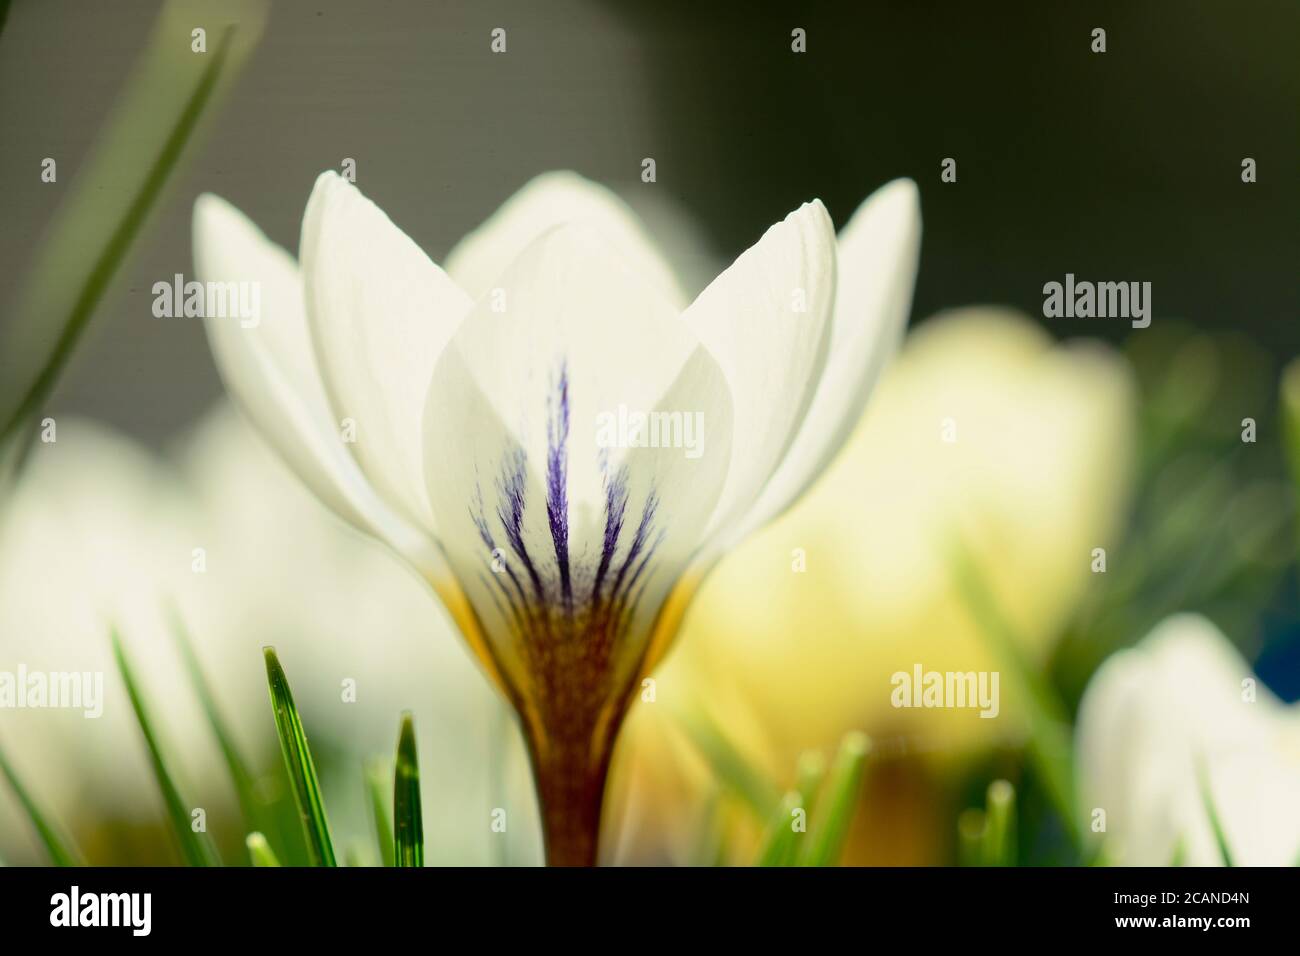 A close-up photo of a beautiful garden crocus flower (Iridaceae family), backlit on dark background. Shallow depth of field. Stock Photo